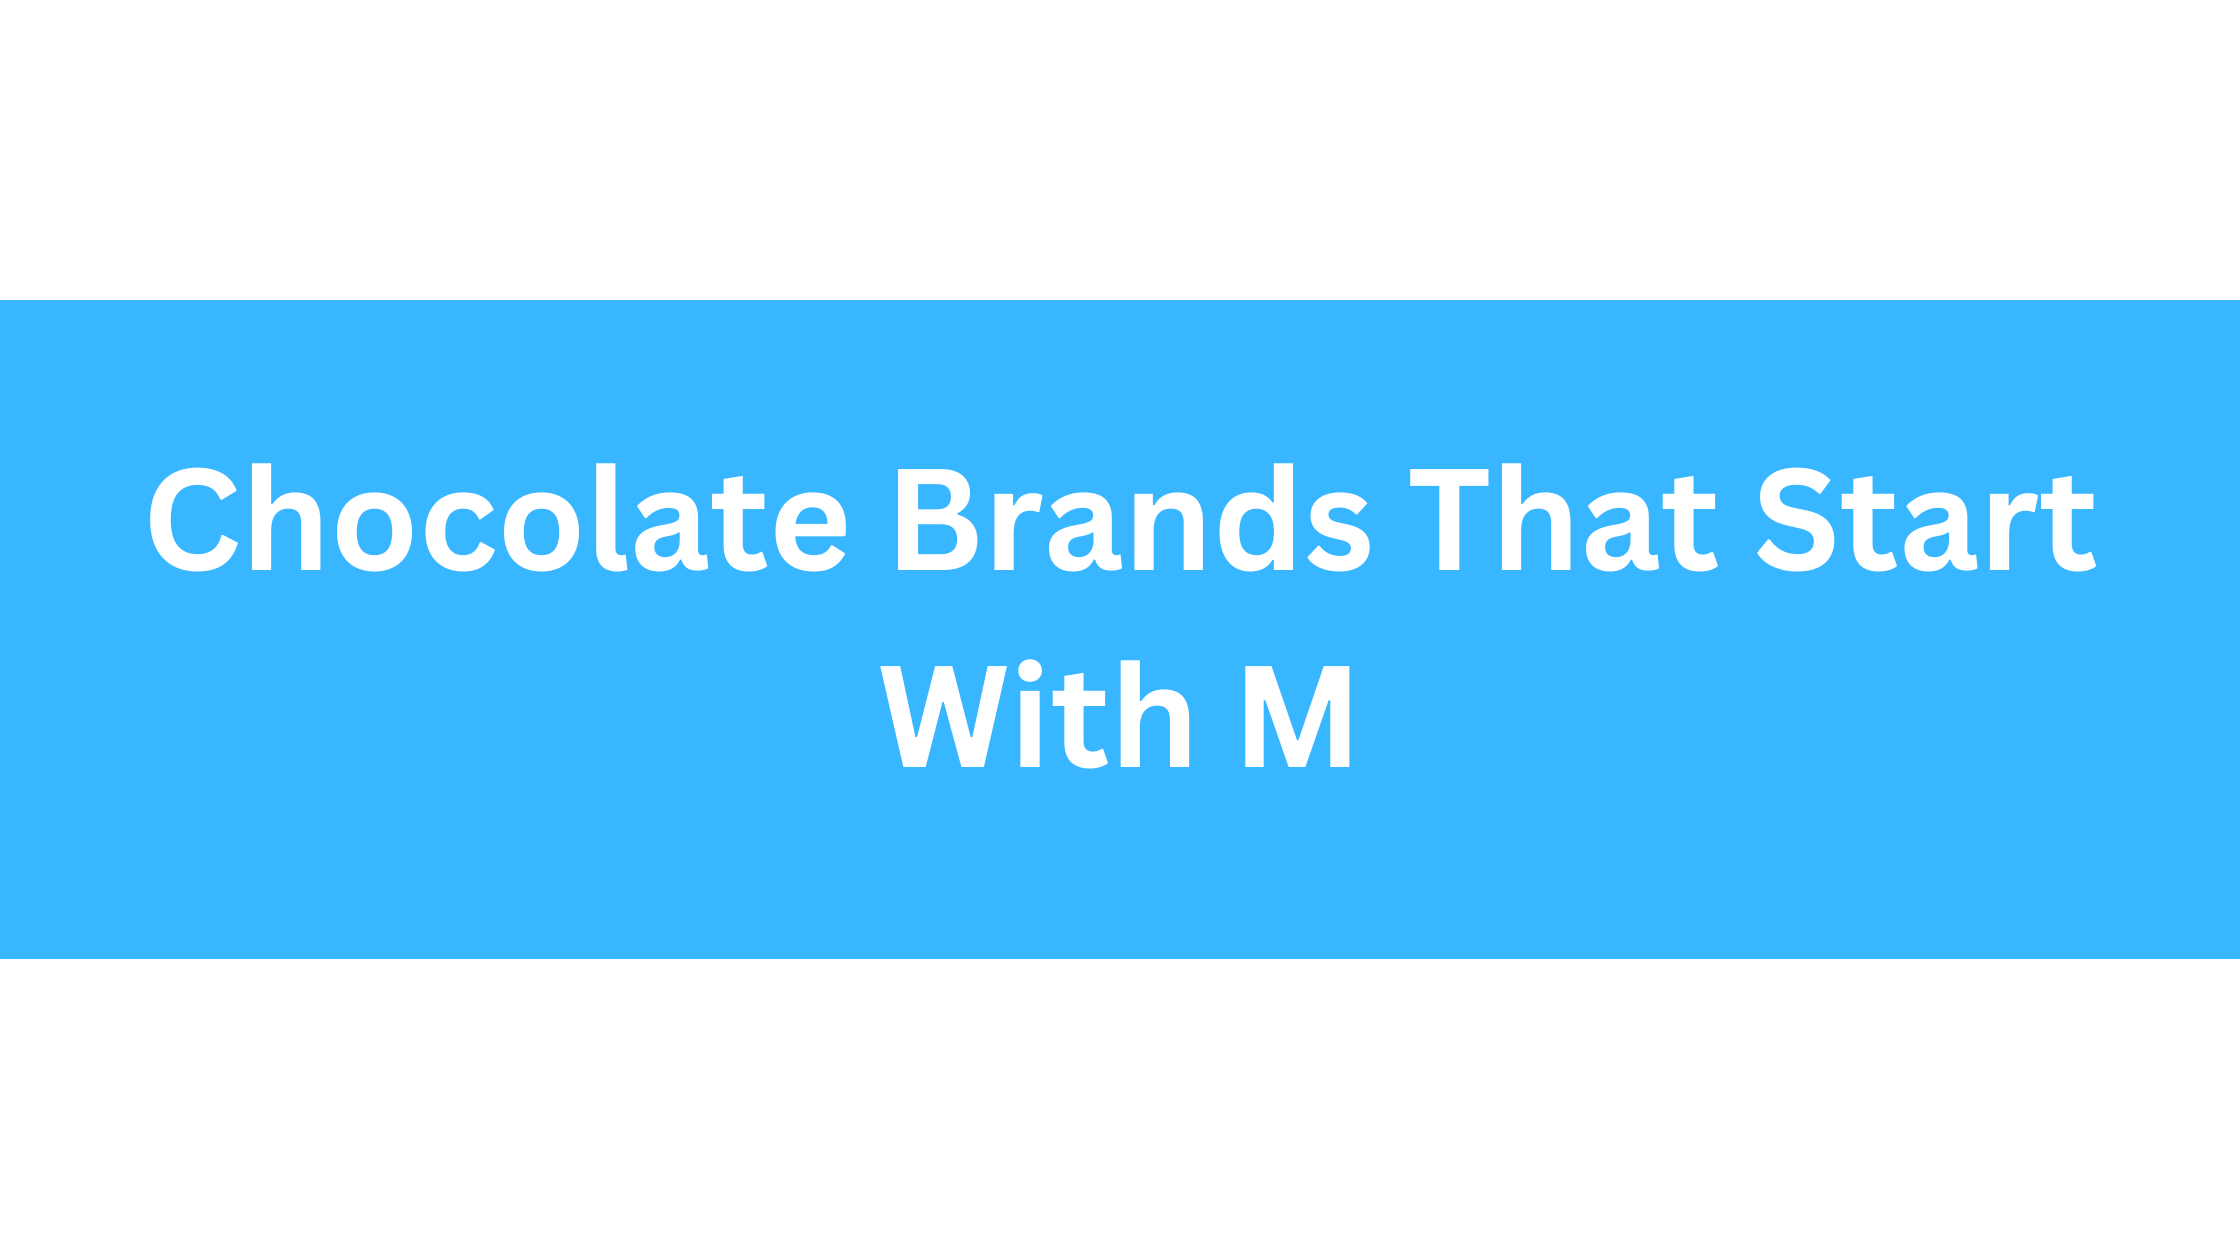 Chocolate Brands That Start With M